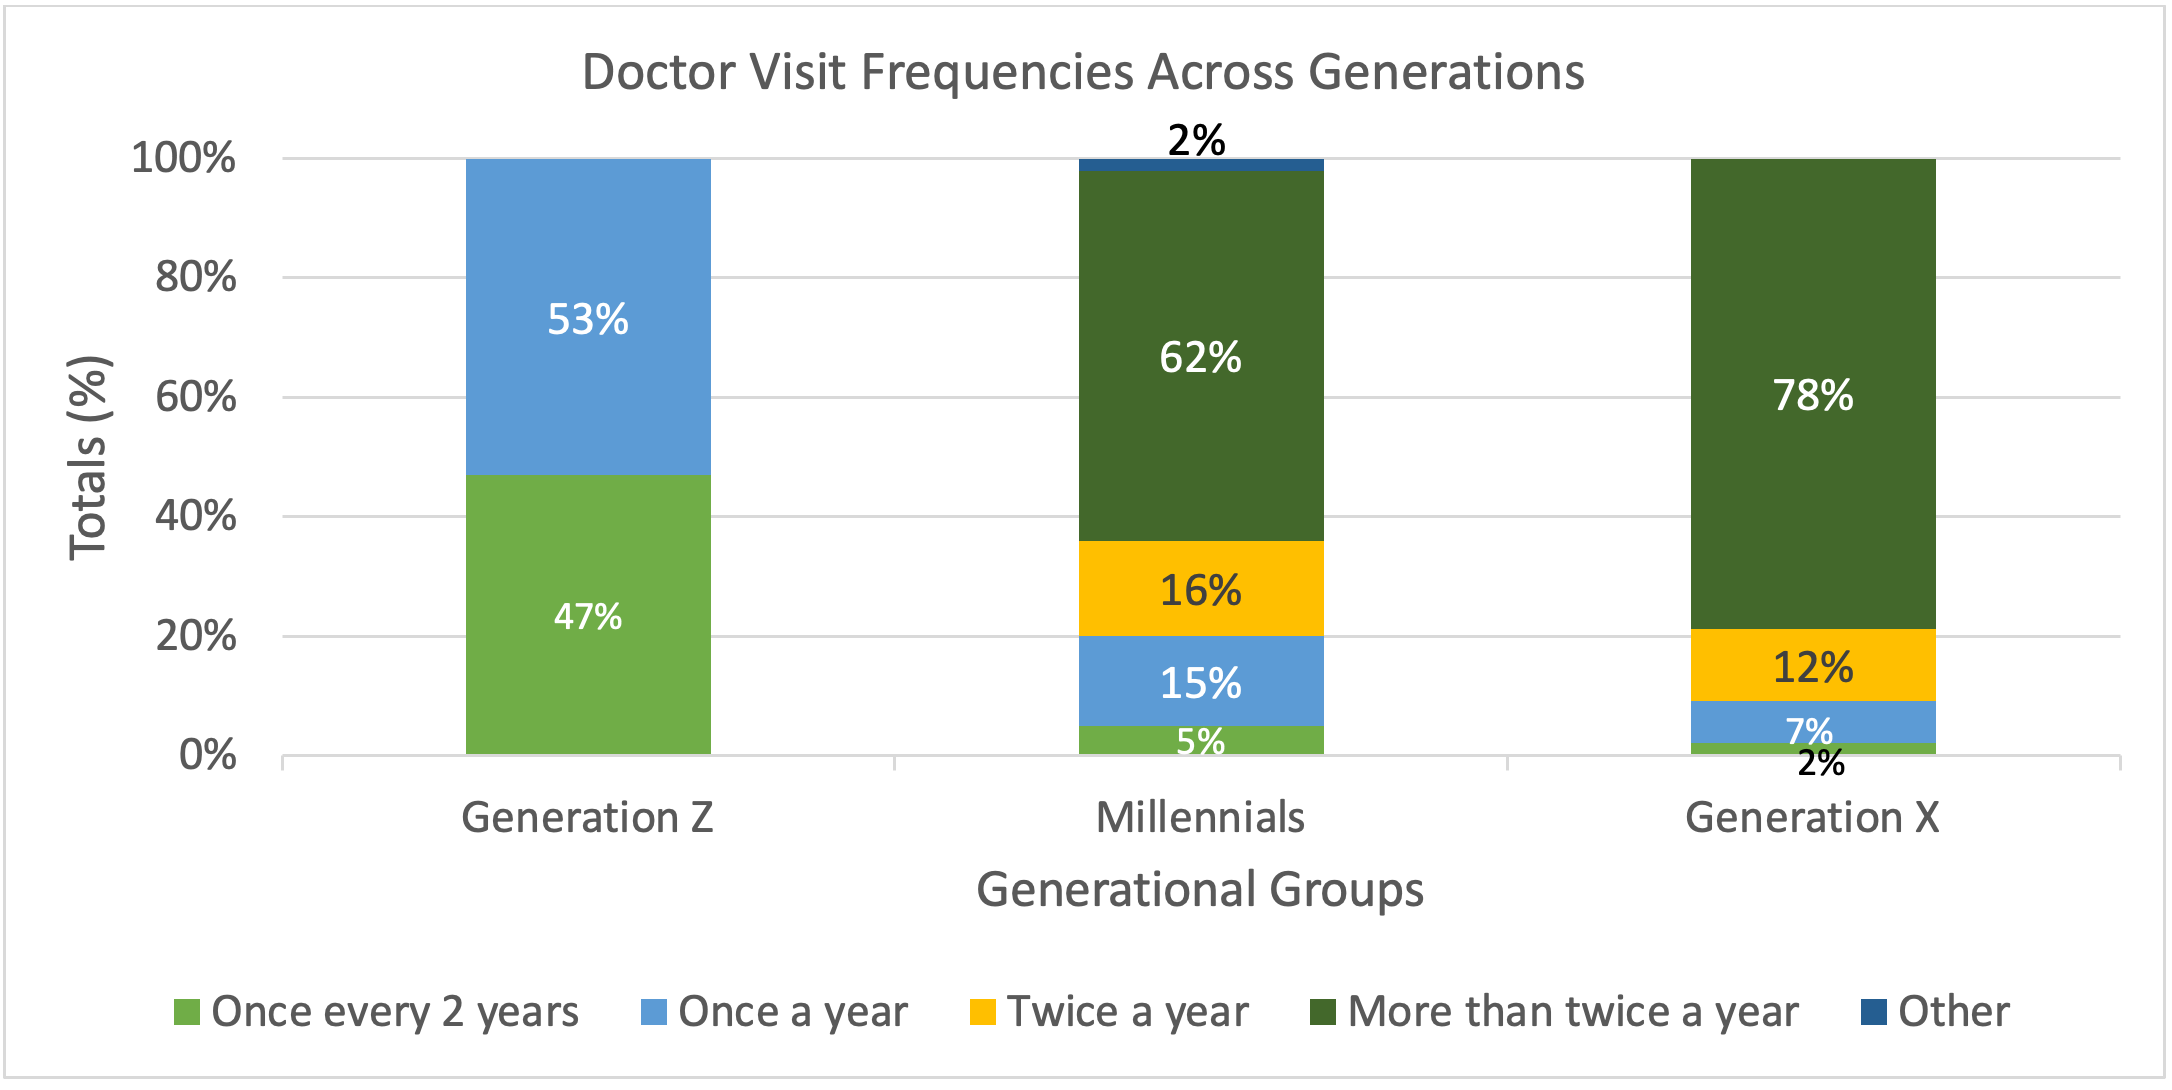 Table 3. Doctor Visit Frequencies Across Generations